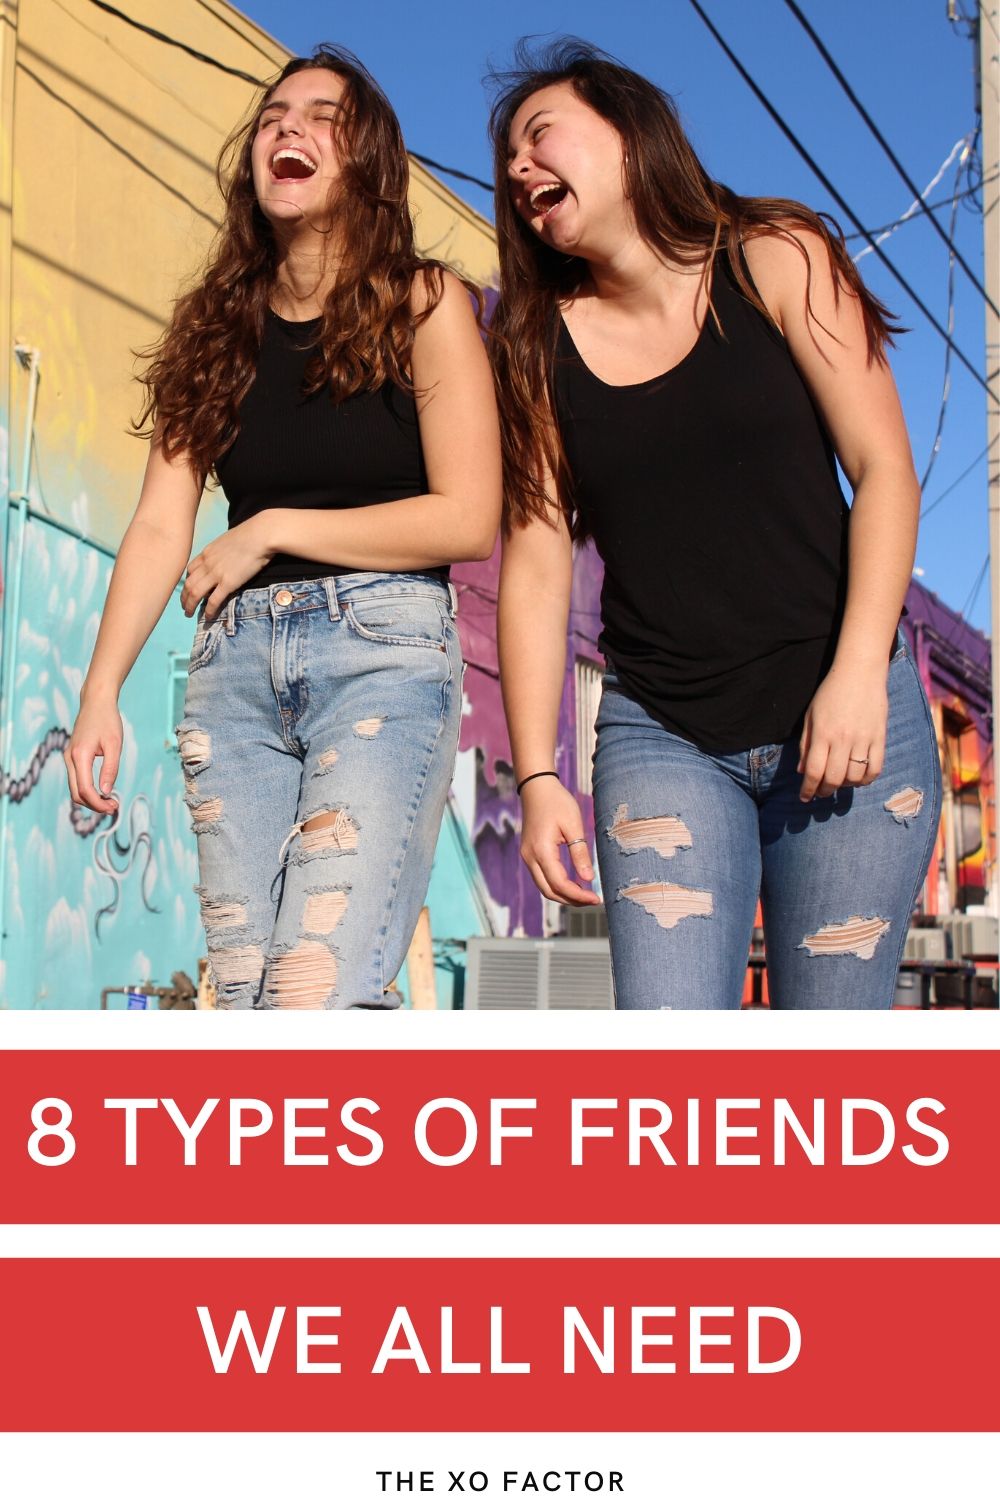 8 types of friends we all need